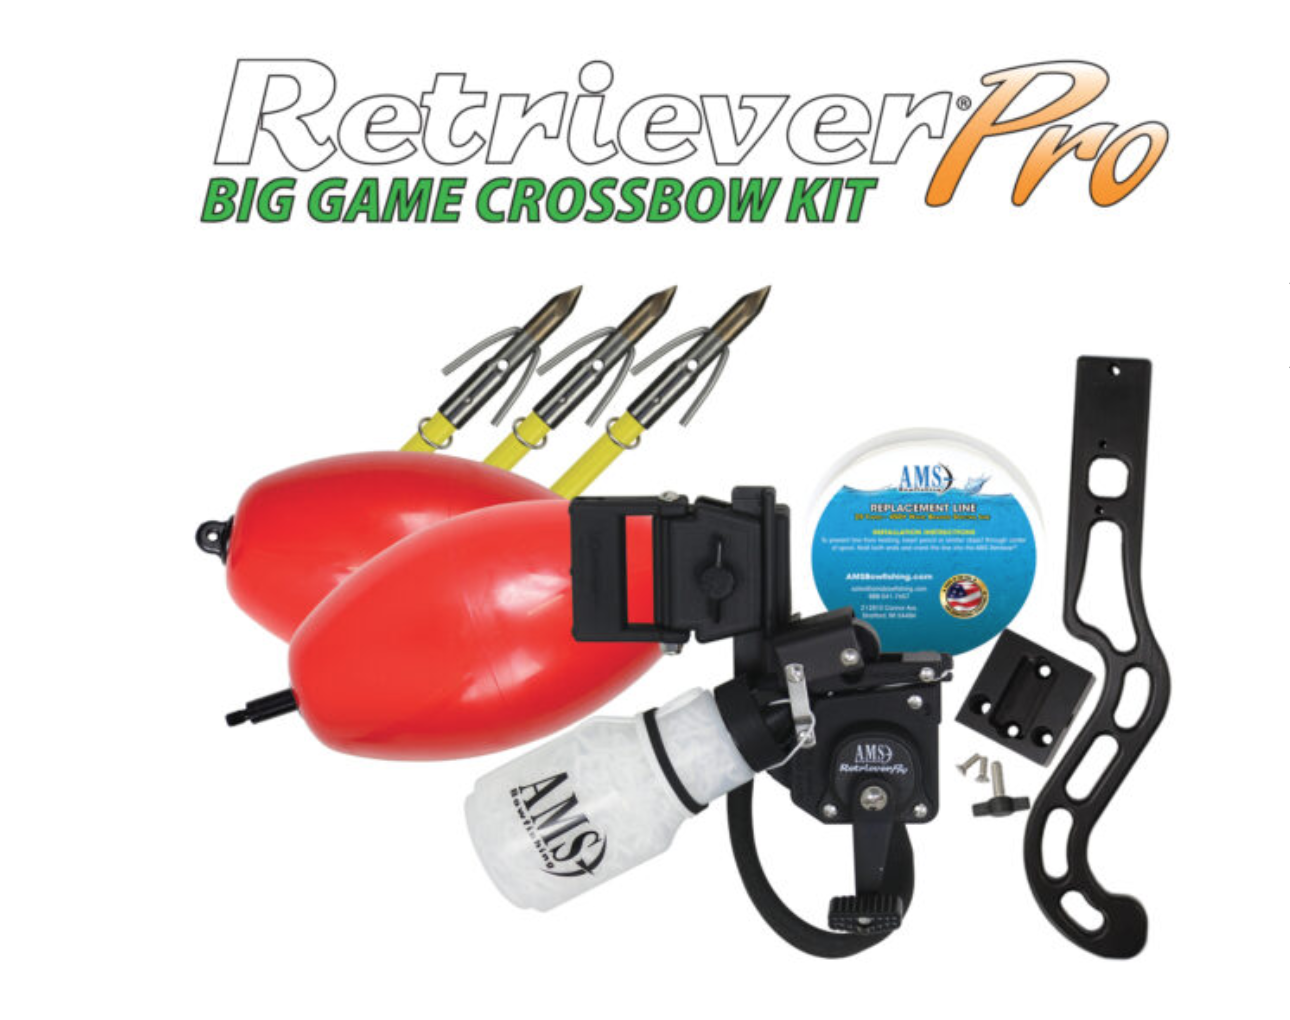 AMS Bowfishing Big Game Crossbow Kit - Made in The USA